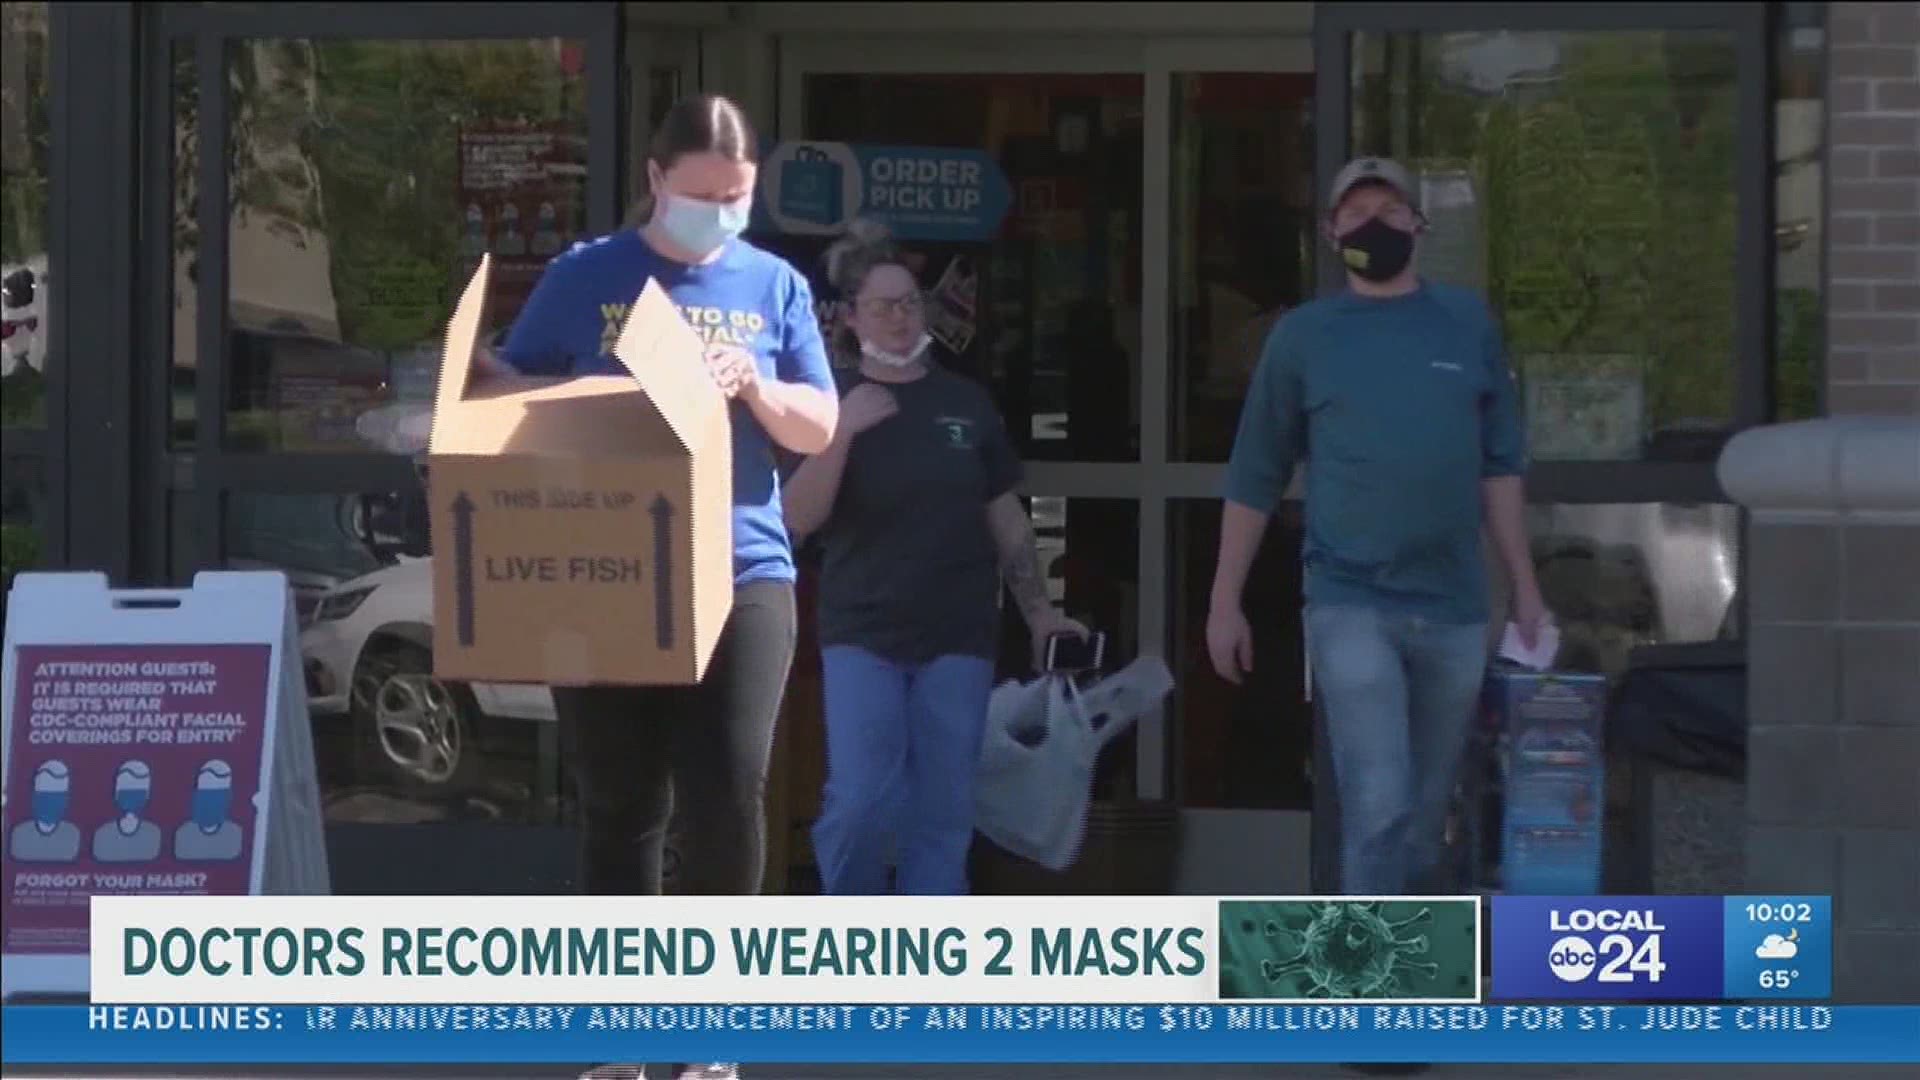 Top infectious disease specialist Dr. Anthony Fauci said two masks are likely more effective.